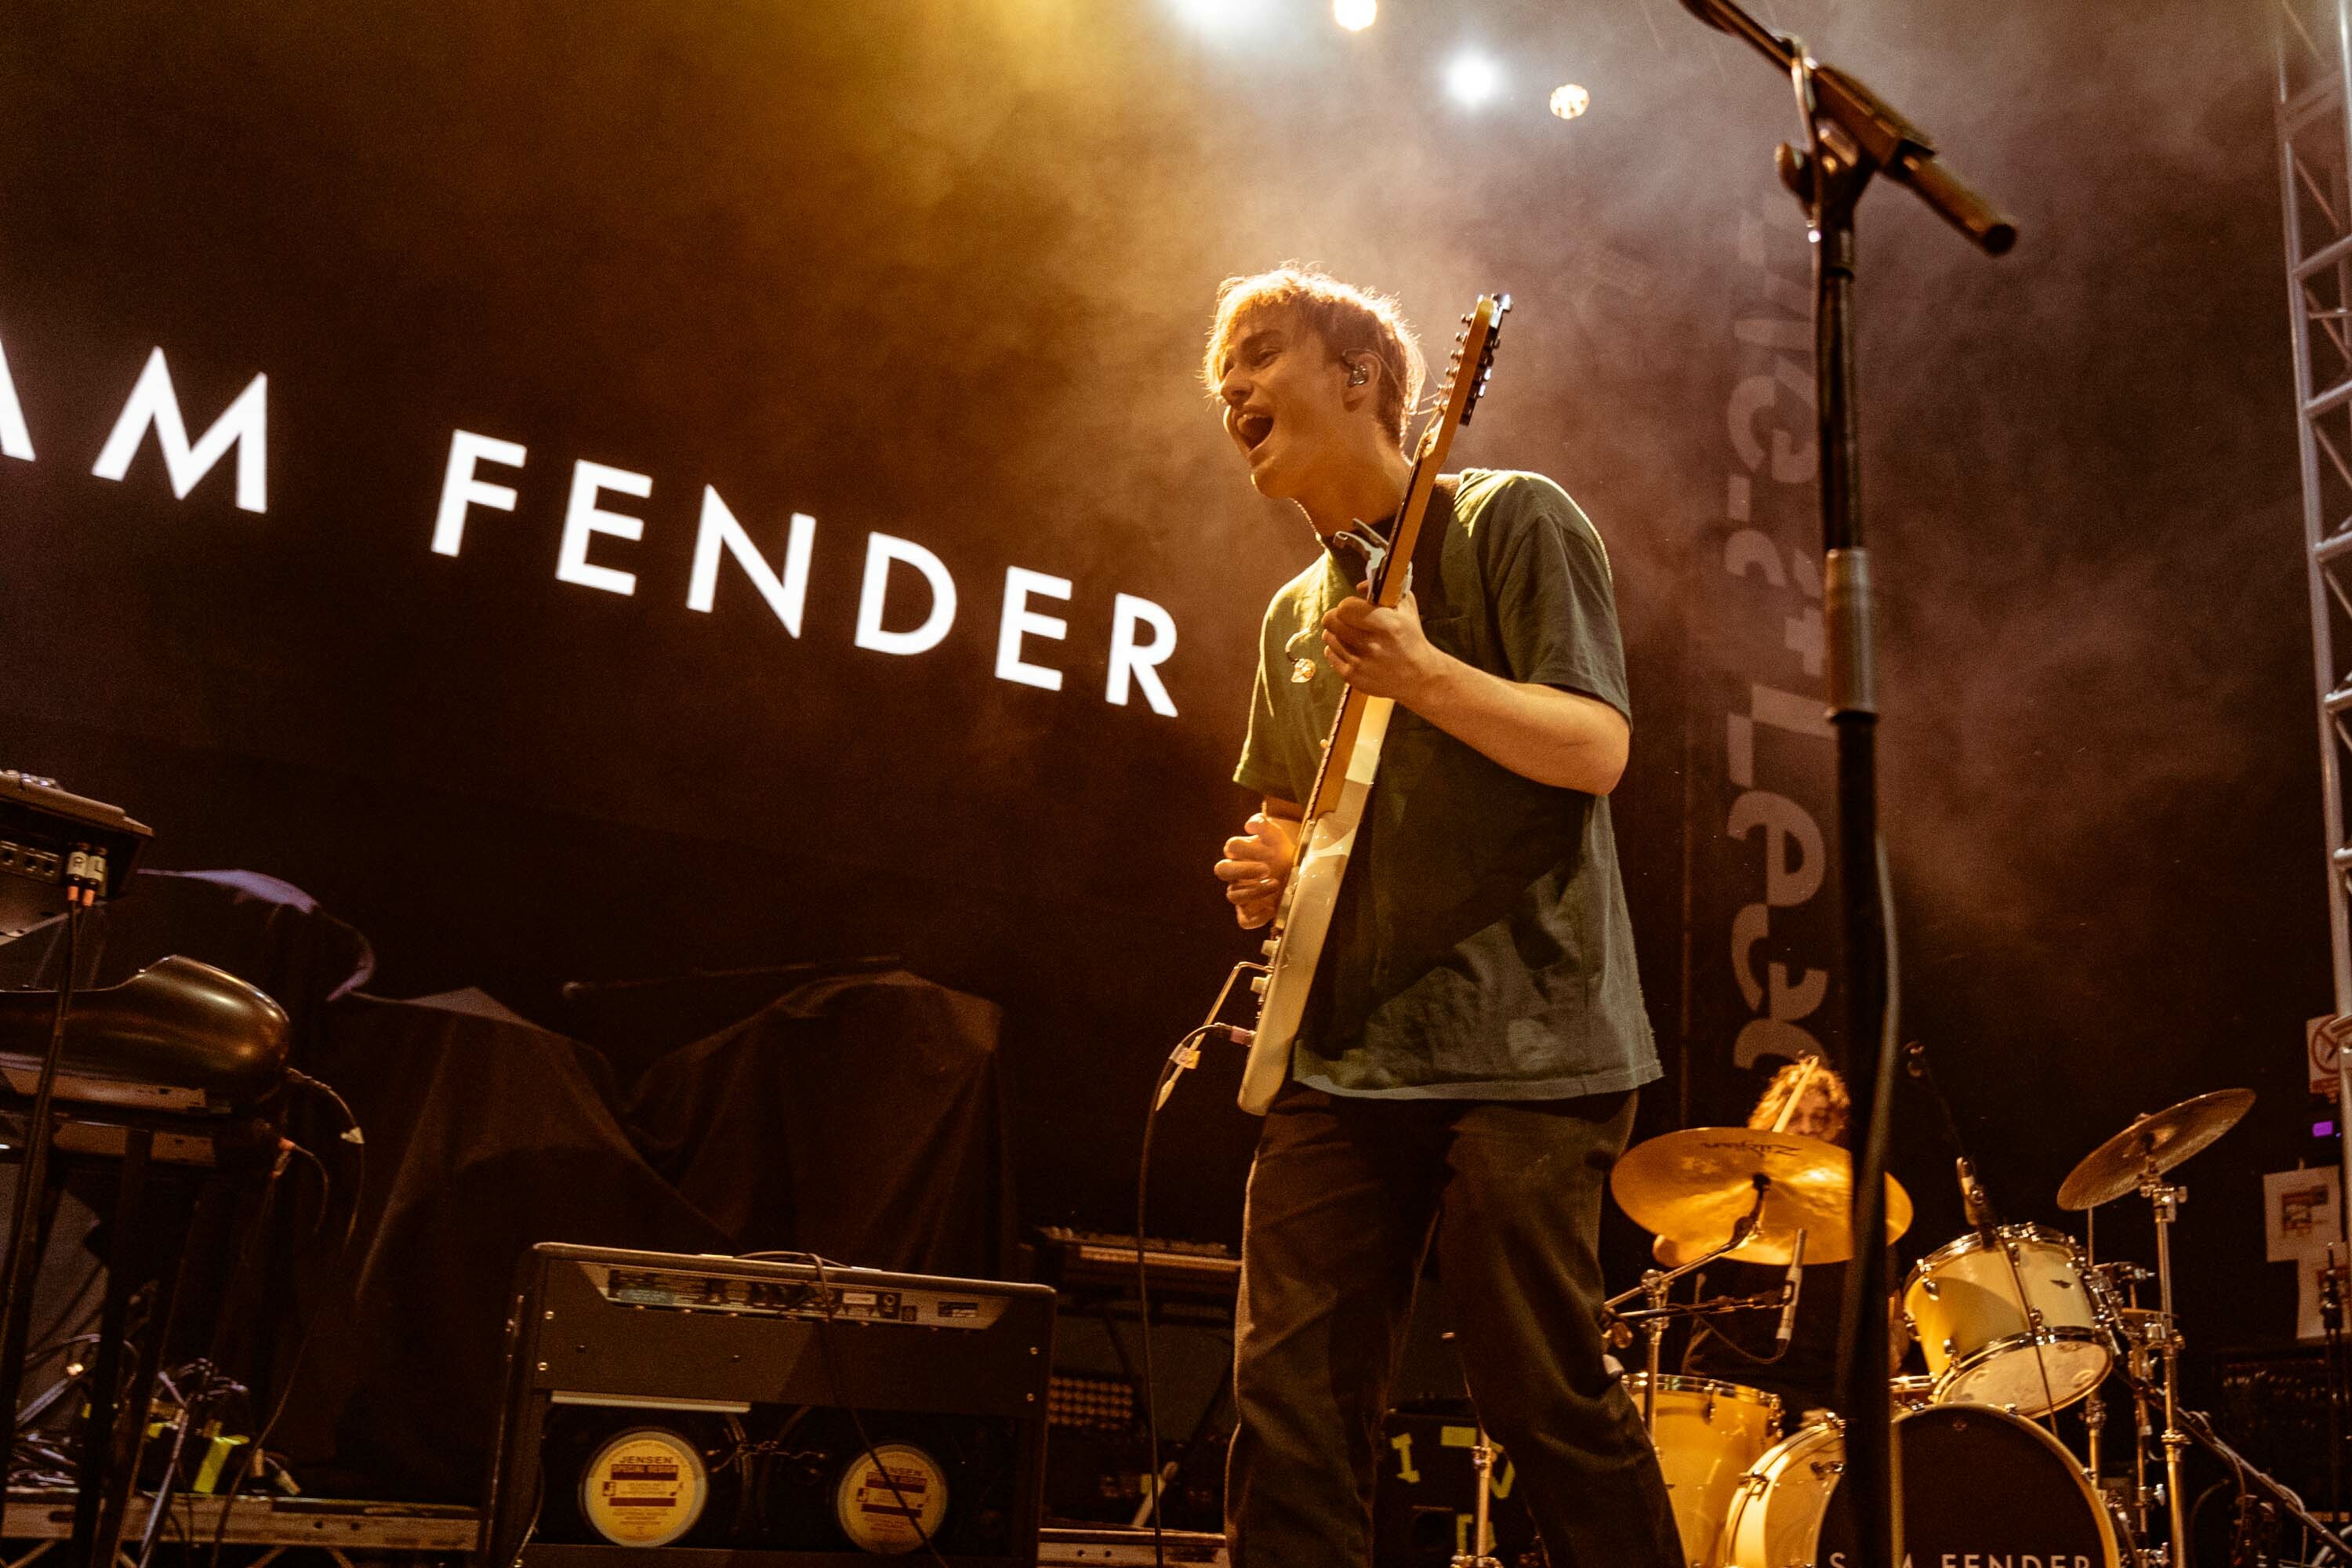 Sam Fender: Known for the high tenor voice and thick Geordie accent, Live At Leeds 2019. 3000x2000 HD Wallpaper.